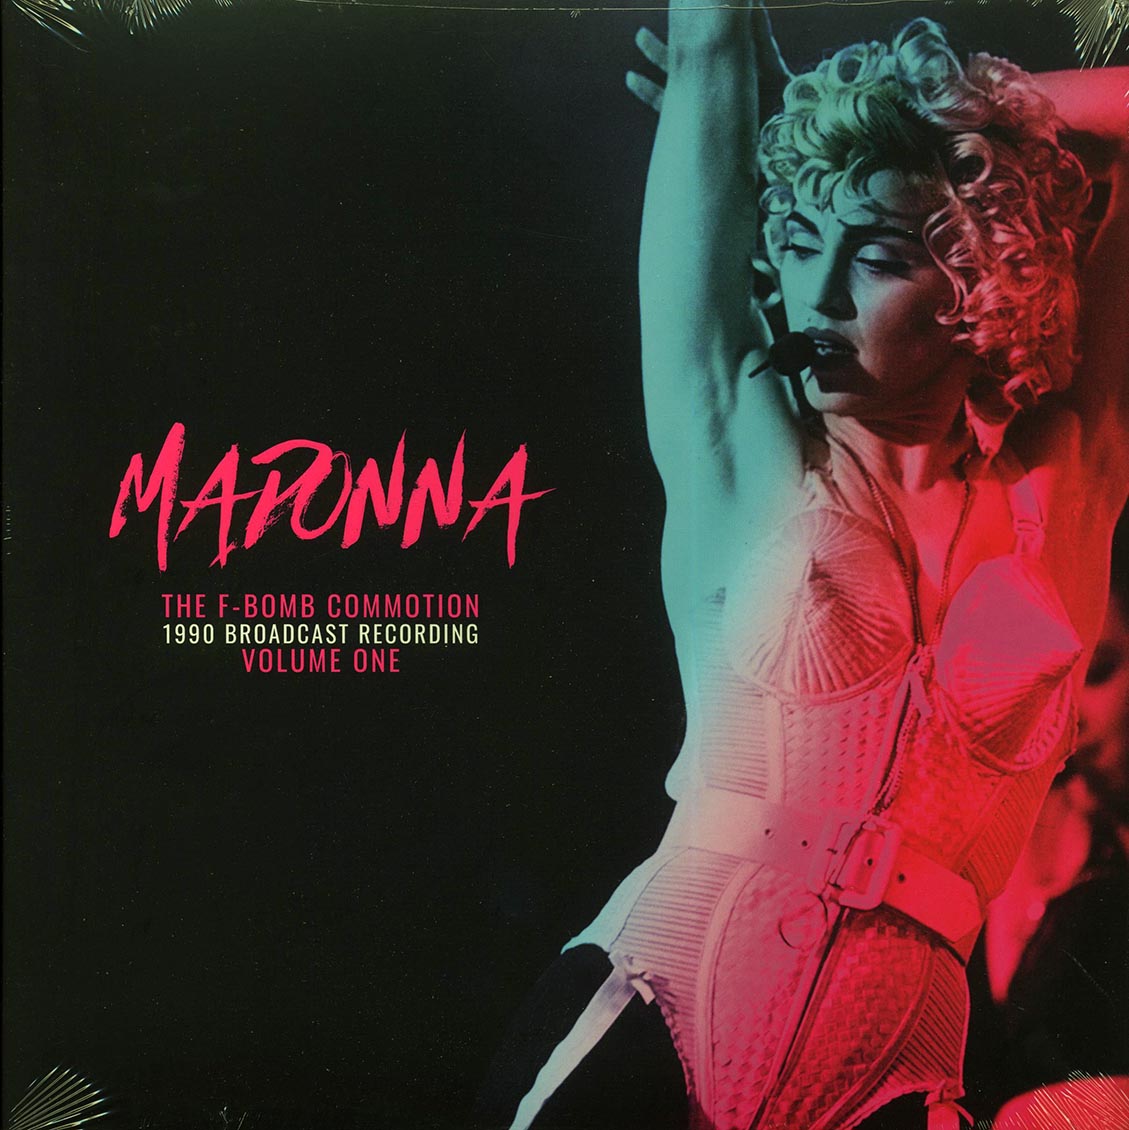 Madonna - The F-bomb Commotion Volume 1: 1990 Broadcast Recording